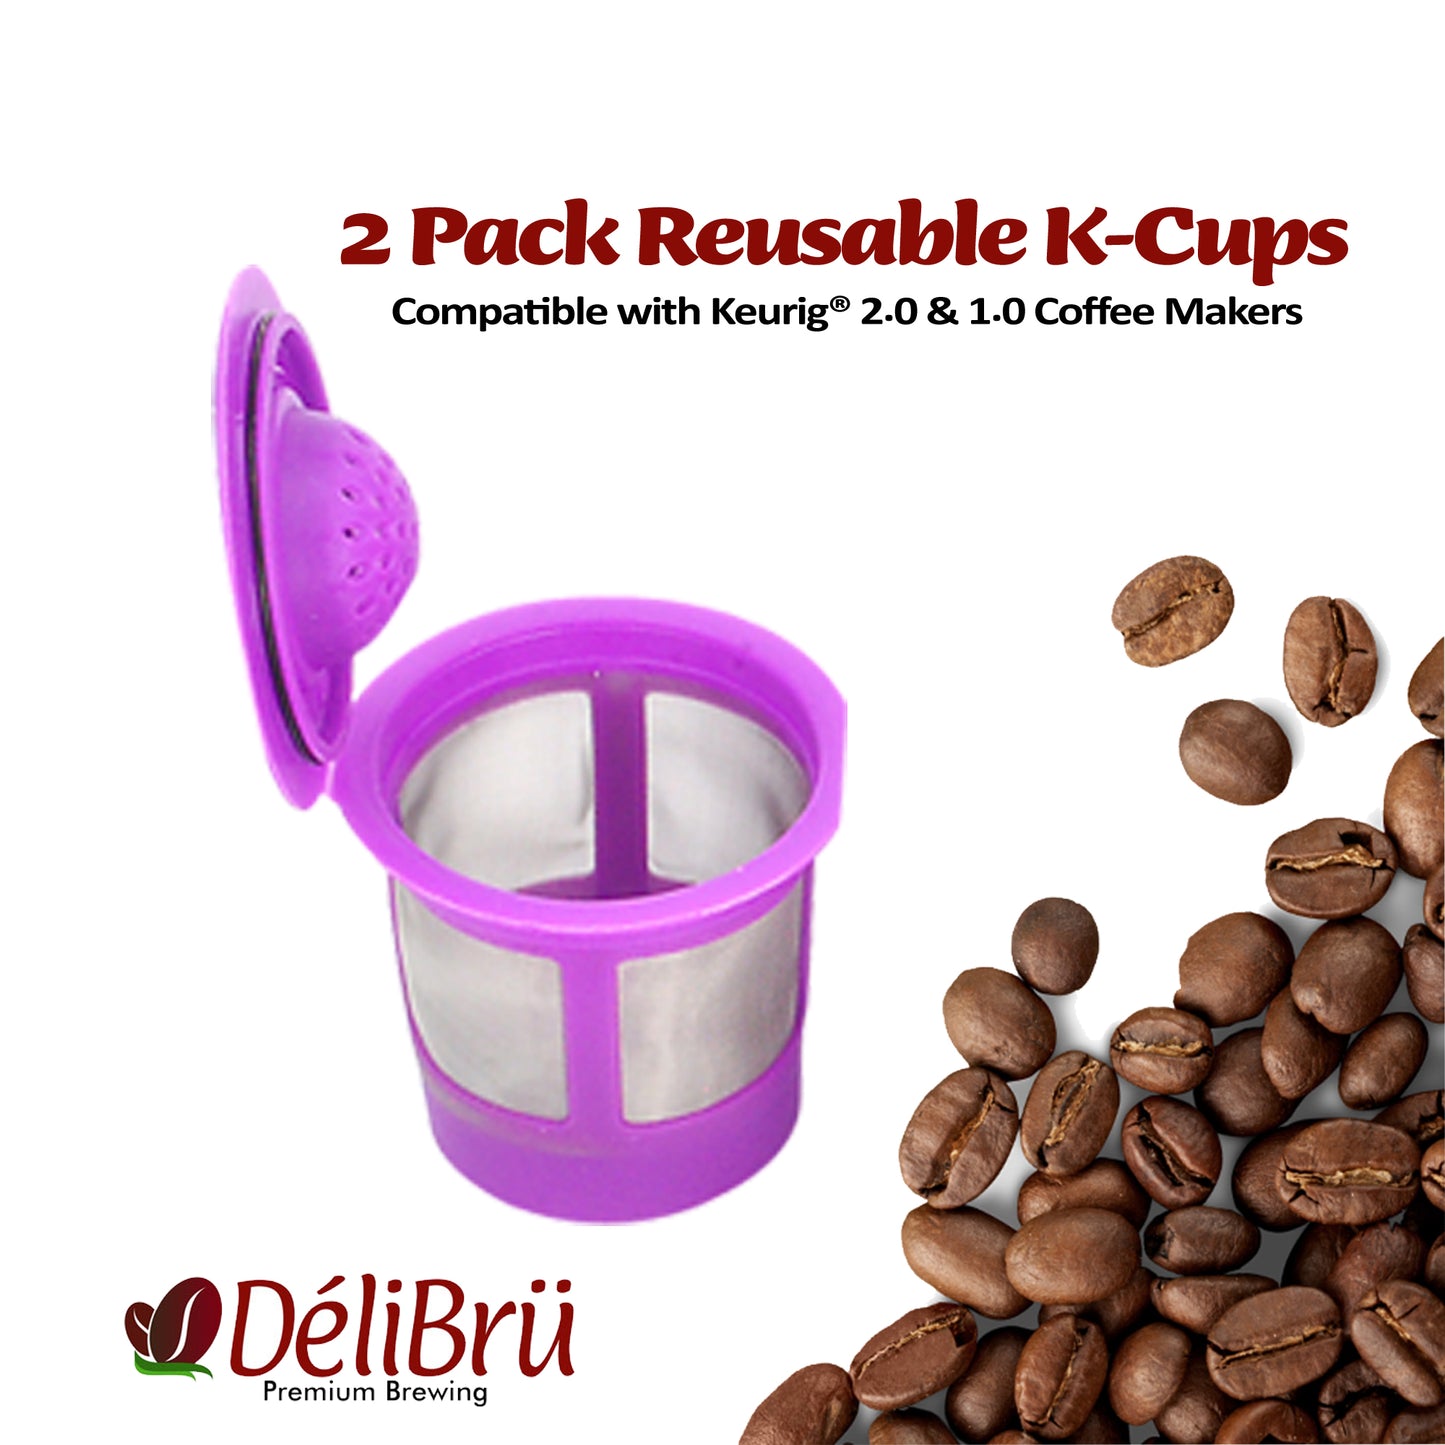 Reusable K-cups for Keurig 2.0 and 1.0 Machines 2packs